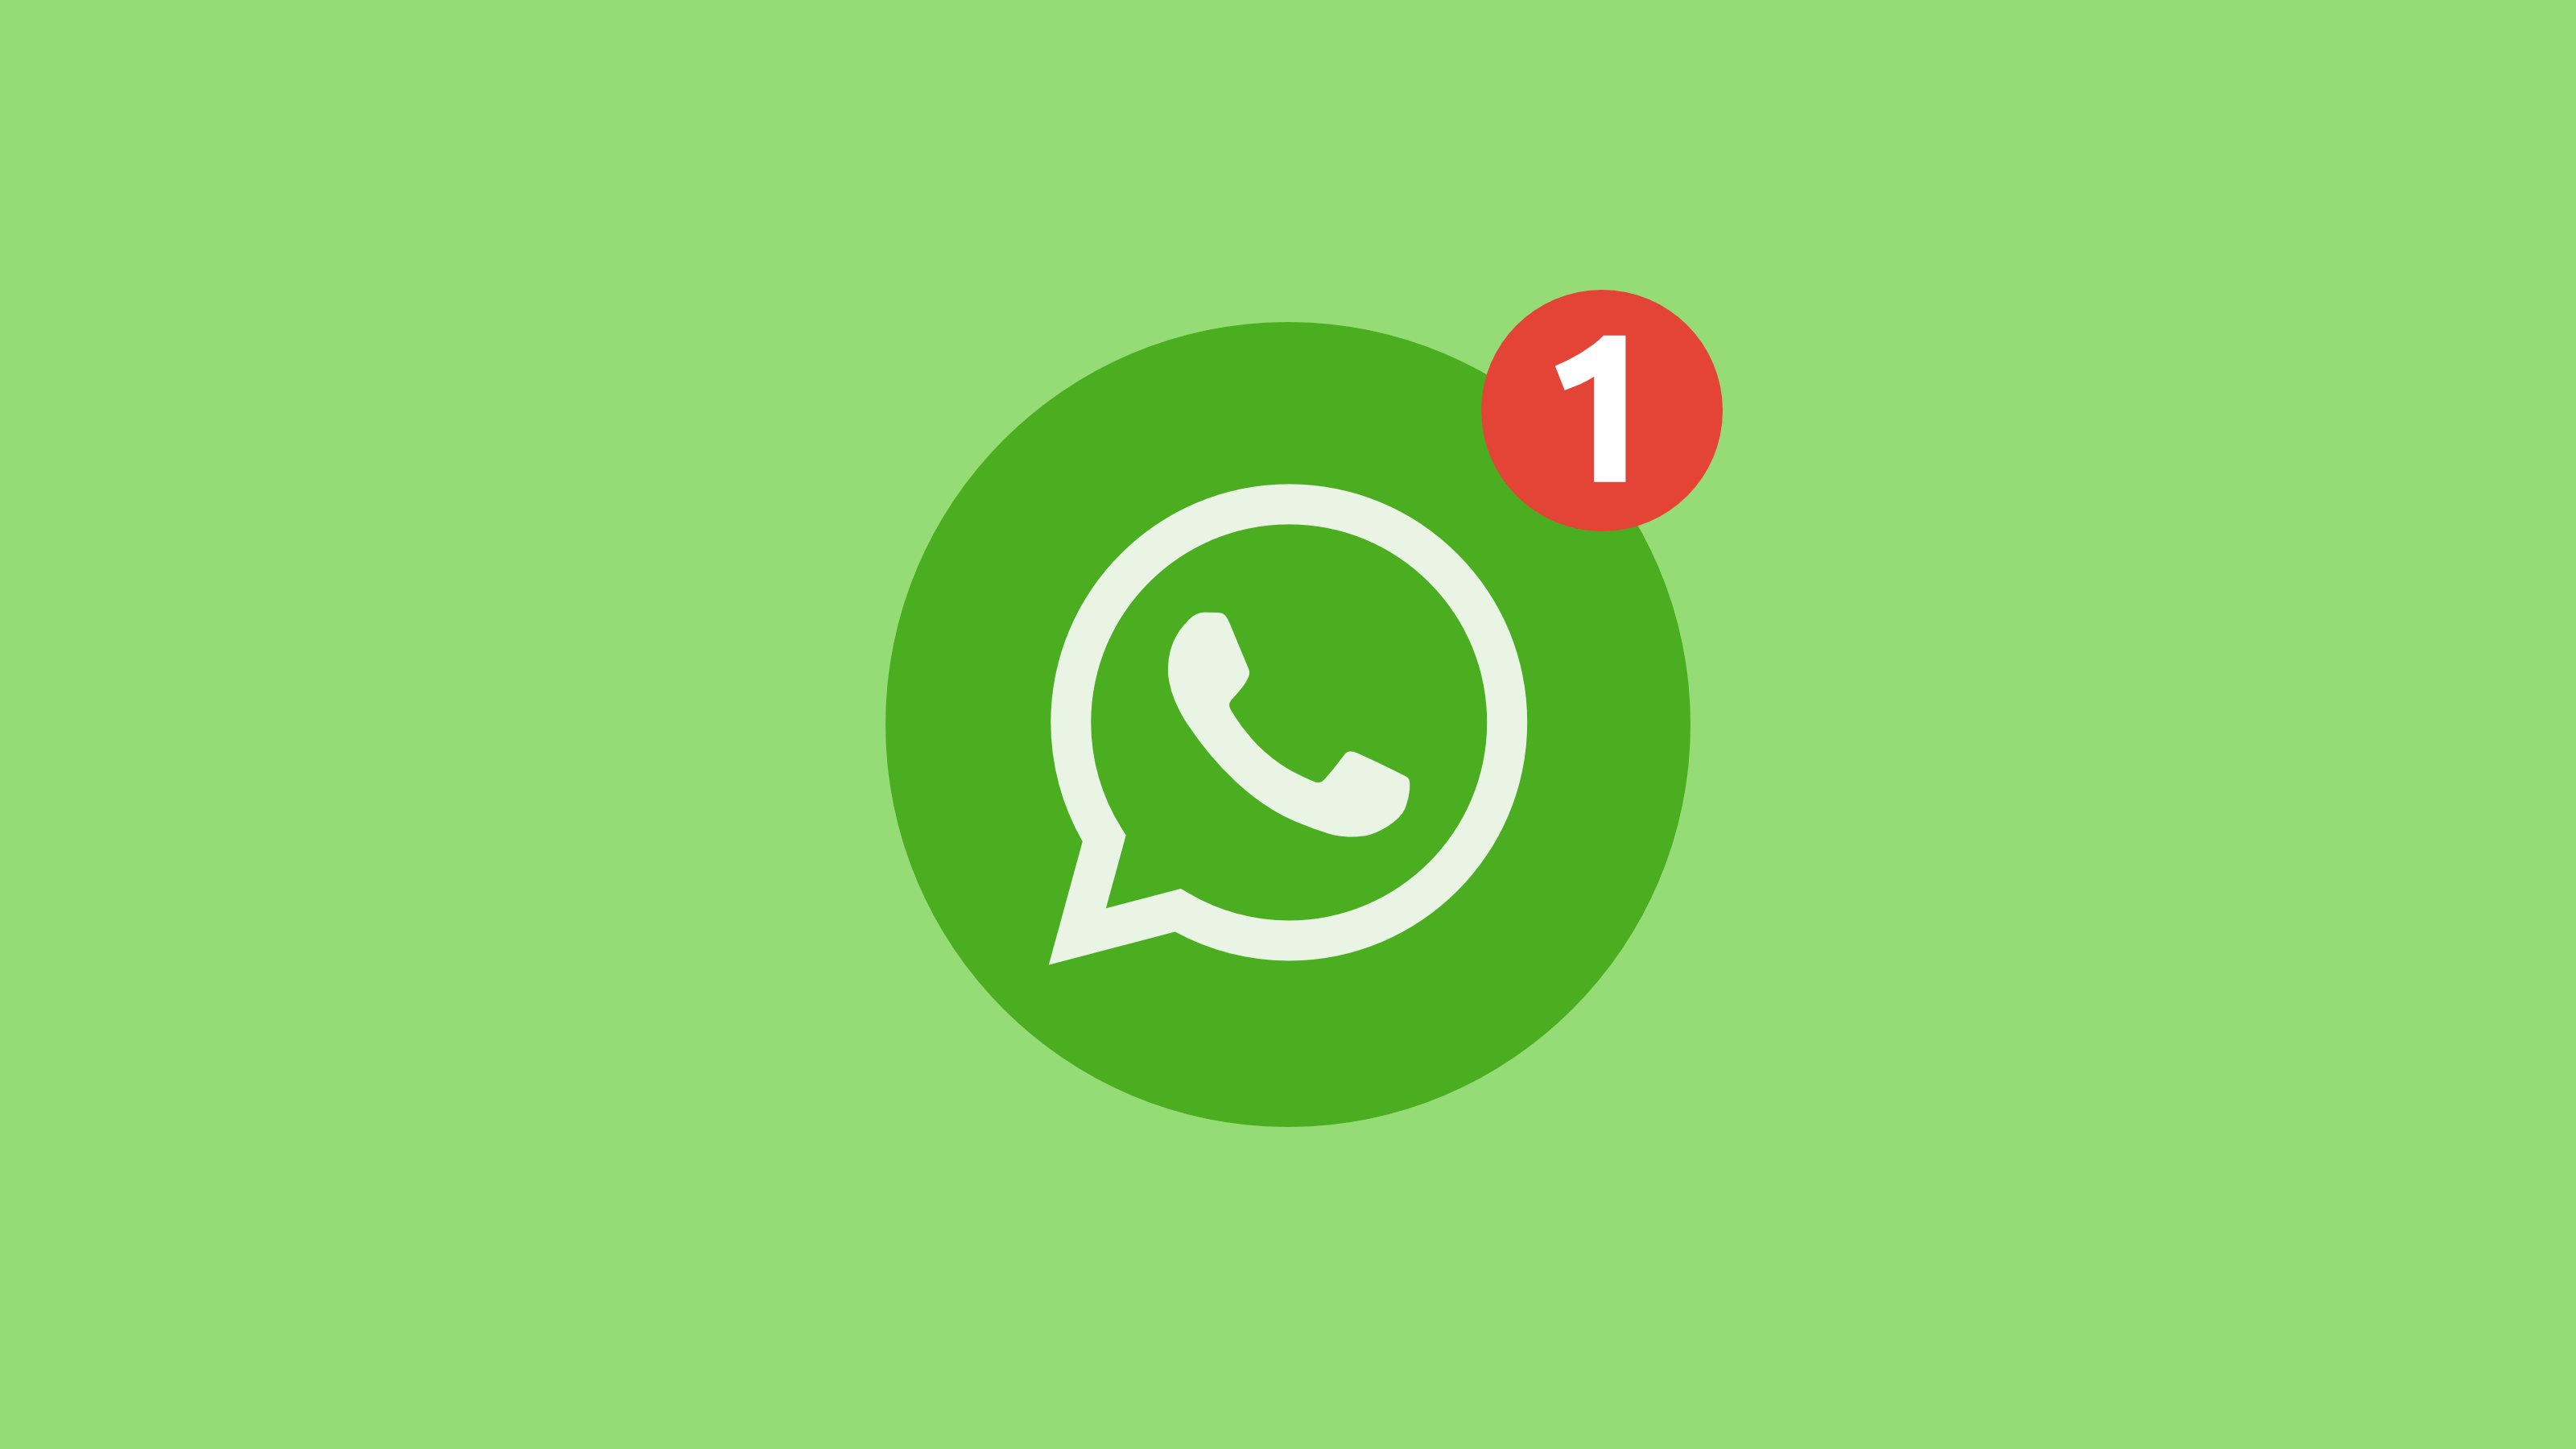 Whatsapp updating its 'delete for everyone' feature to an indefinite time period; testing PiP mode on iPhone